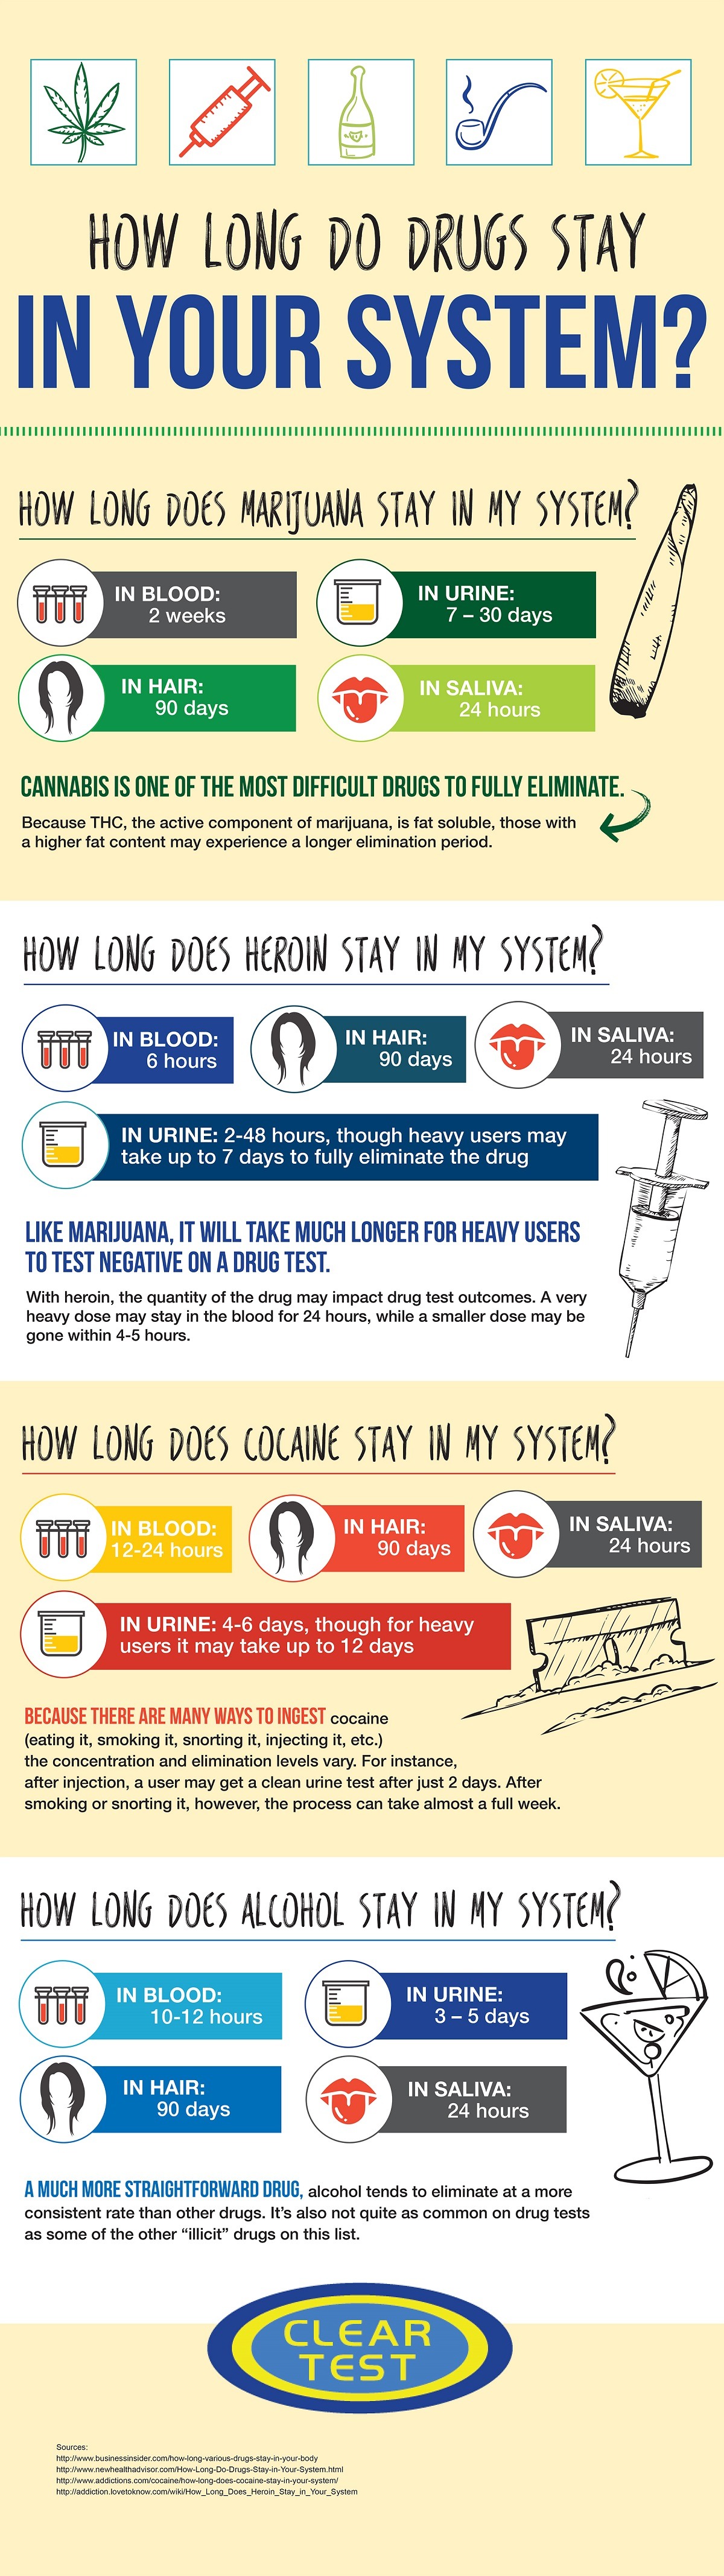 How Long Do Drugs Stay in Your System Infographic